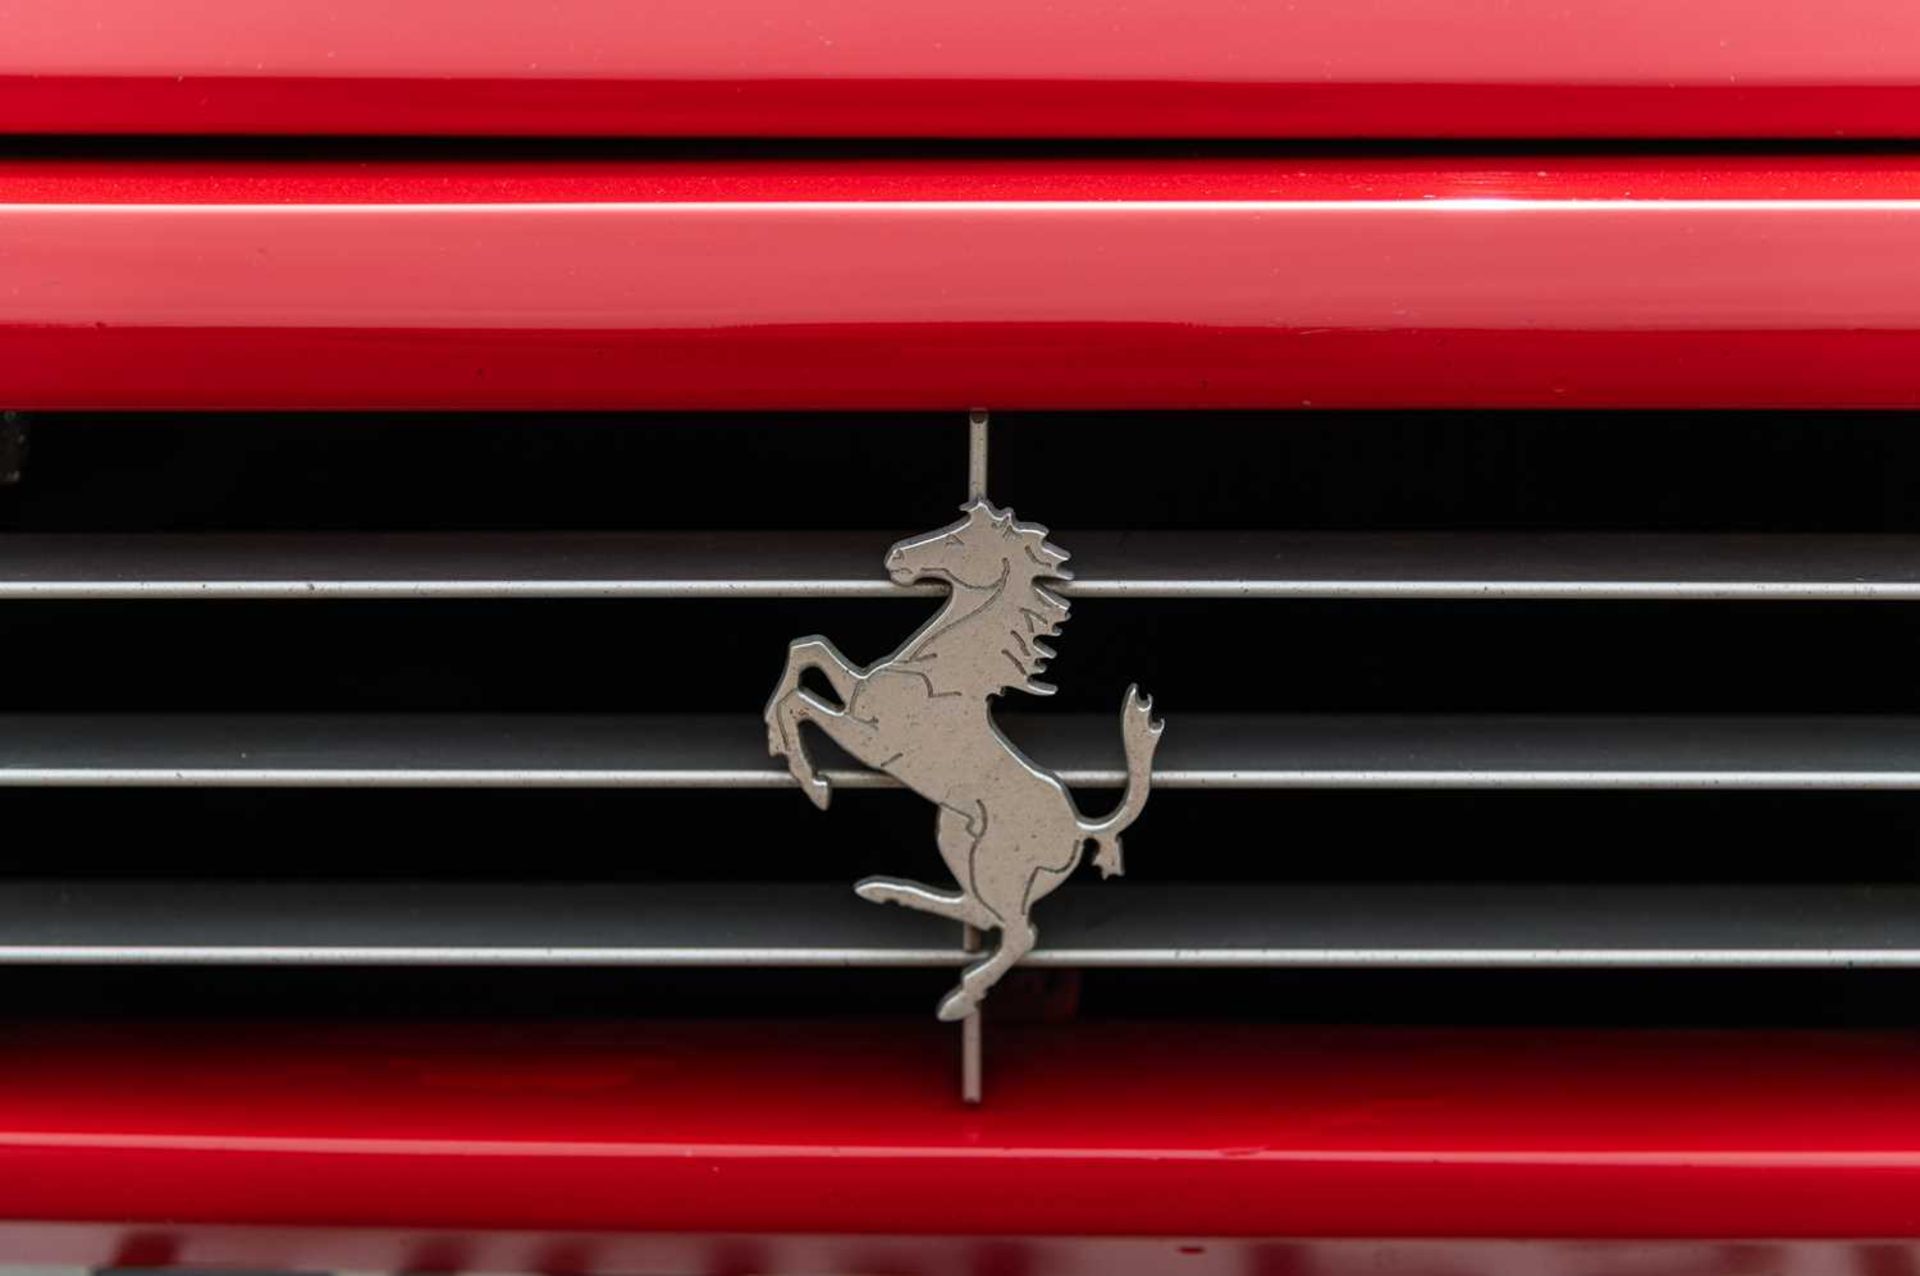 1988 Ferrari Mondial QV ***NO RESERVE*** Remained in the same ownership for nearly two decades finis - Image 35 of 91